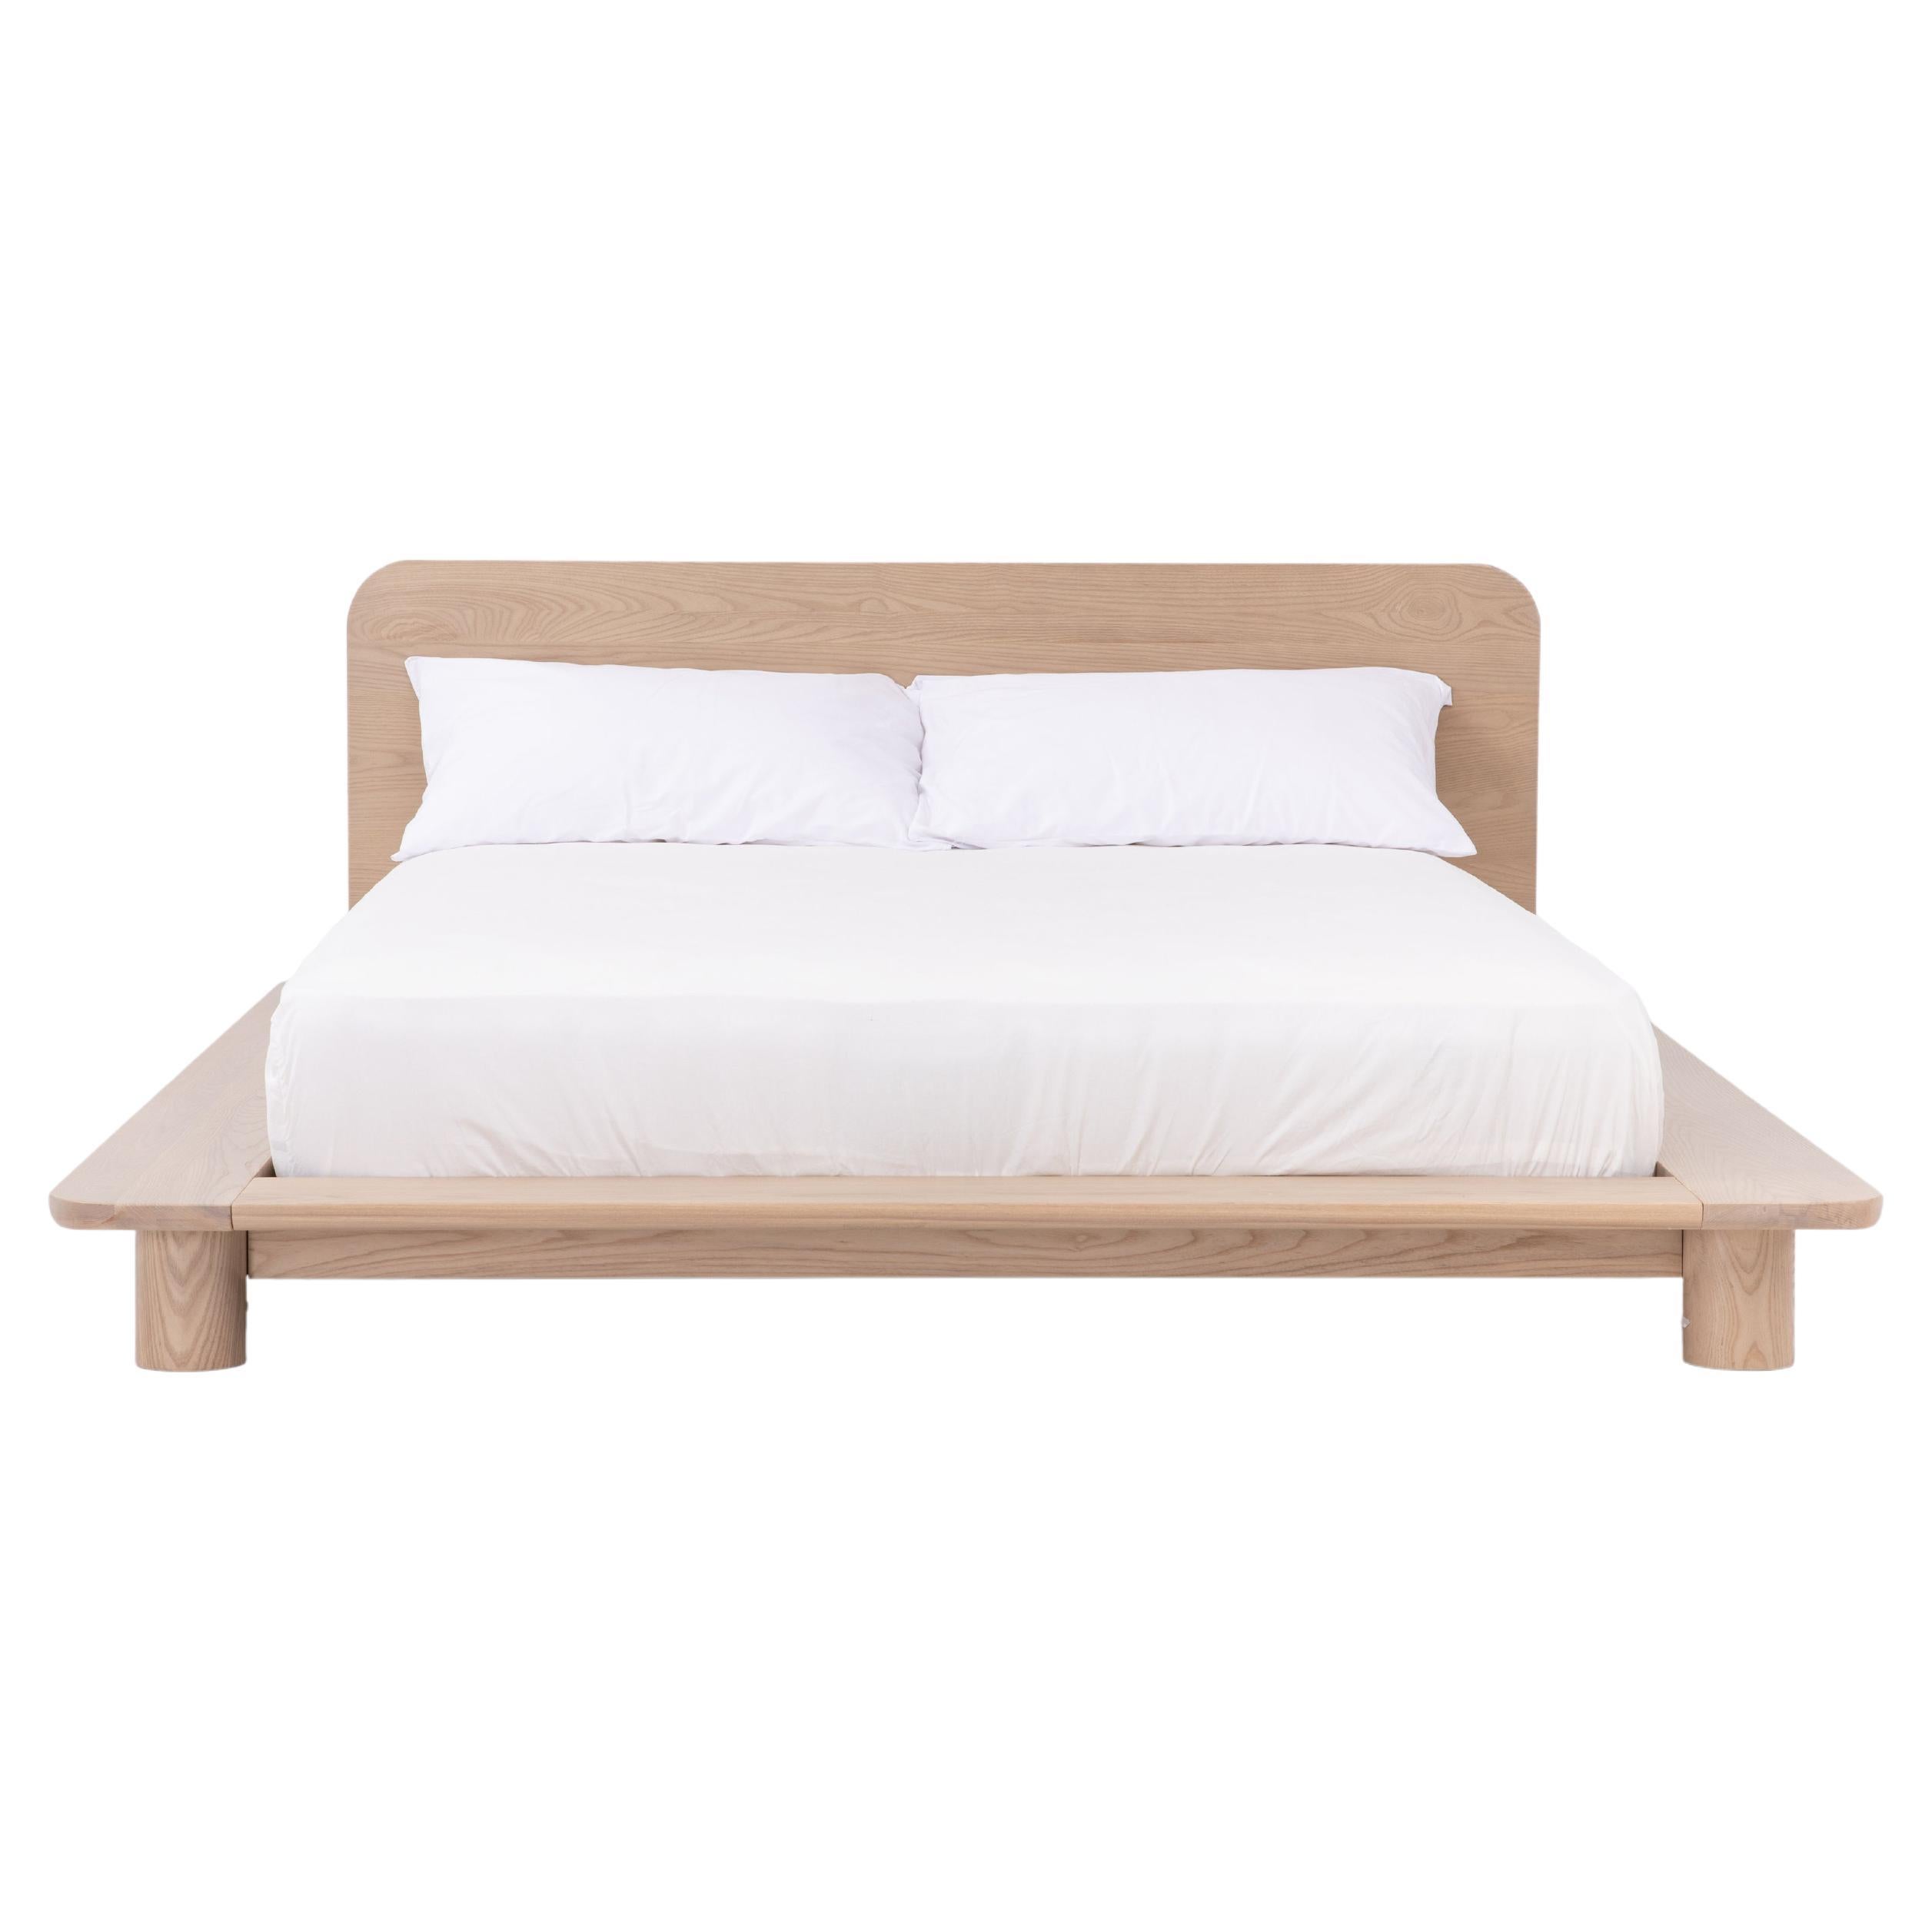 Kiral Bed by Sun at Six, Minimalist Nude King Bed in Wood For Sale